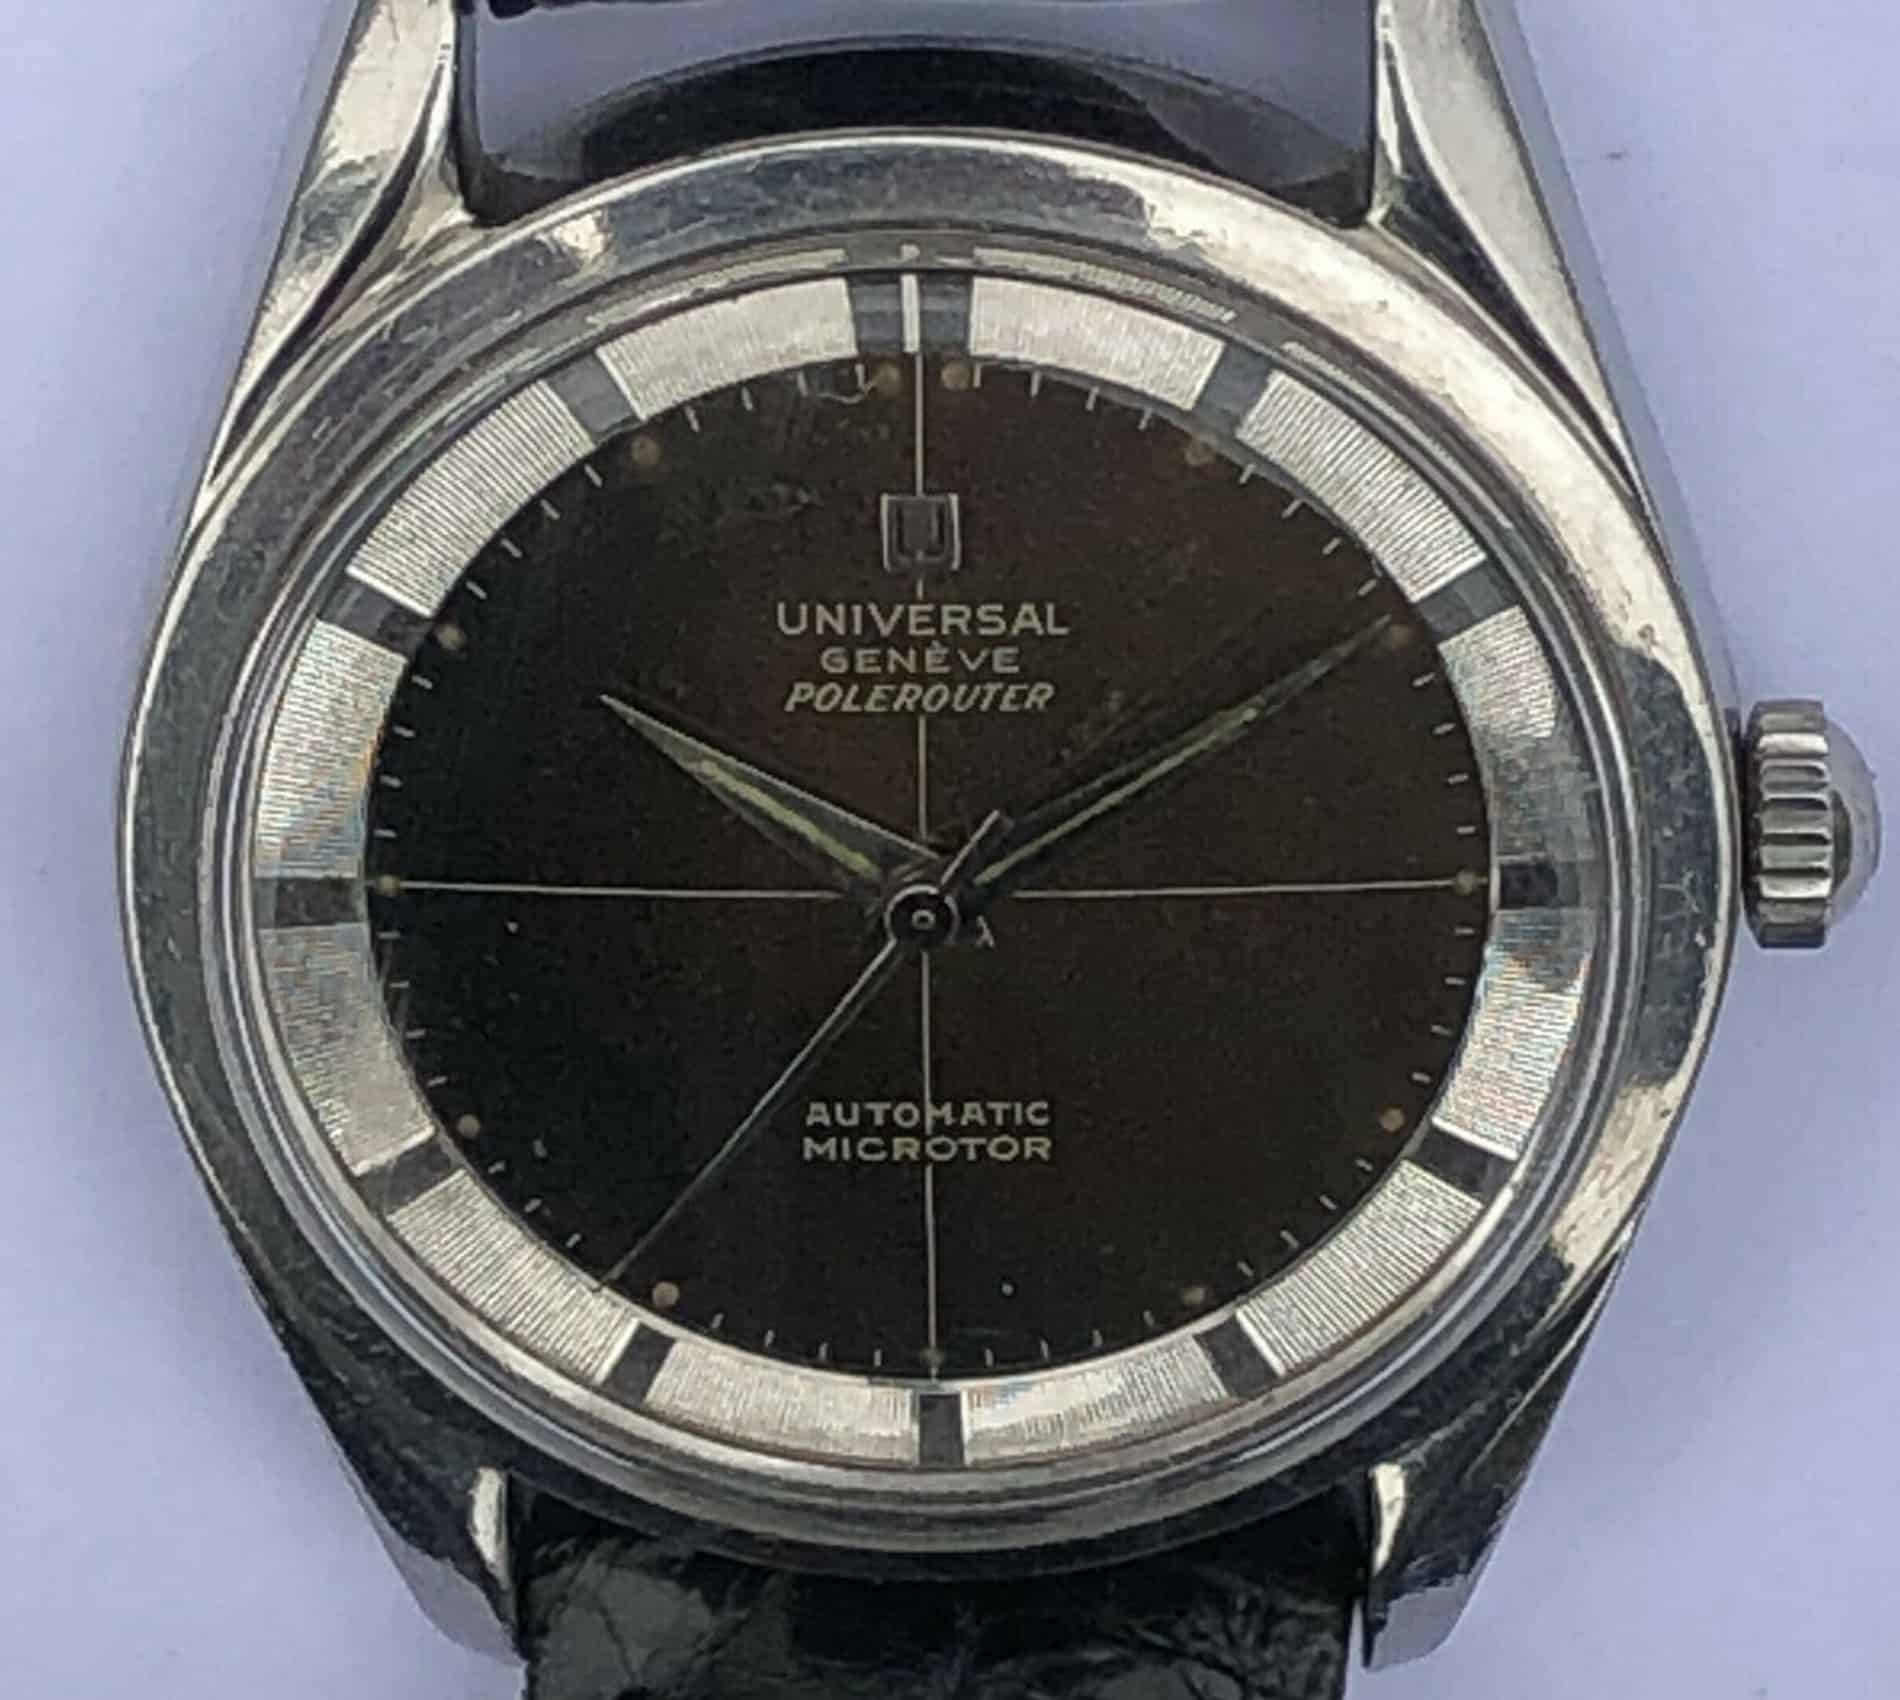 eBay Finds: Universal Genève Polerouter, Bulova 666 Chronograph, and More